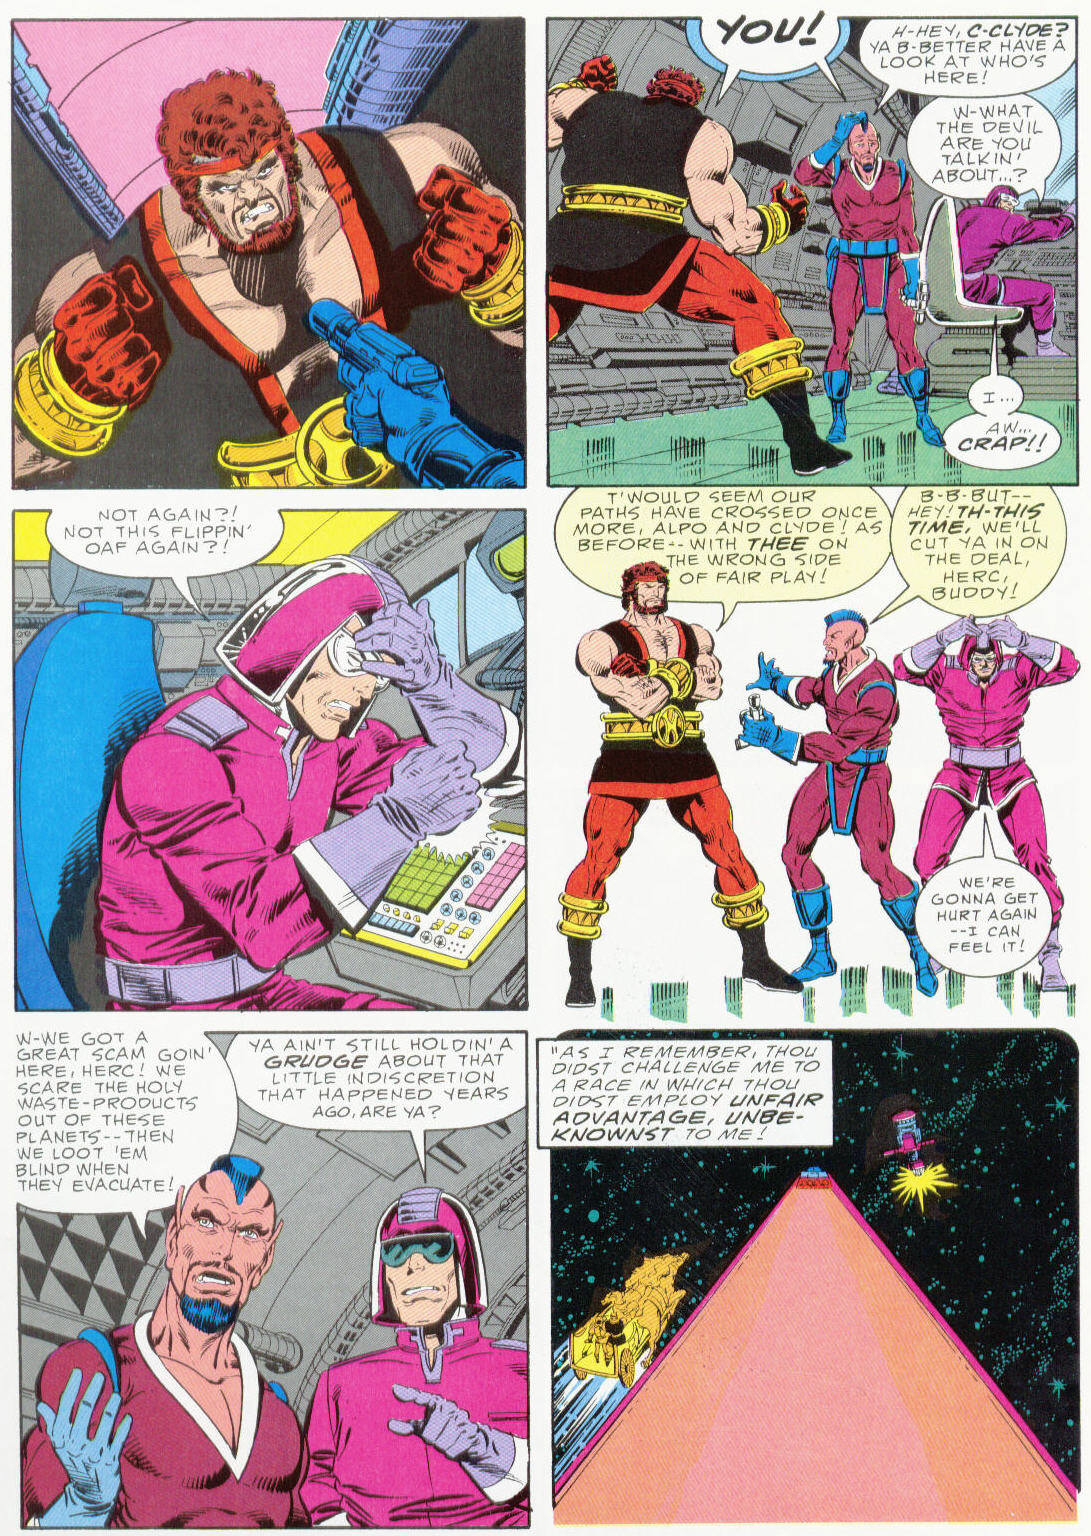 Marvel Graphic Novel issue 37 - Hercules Prince of Power - Full Circle - Page 32